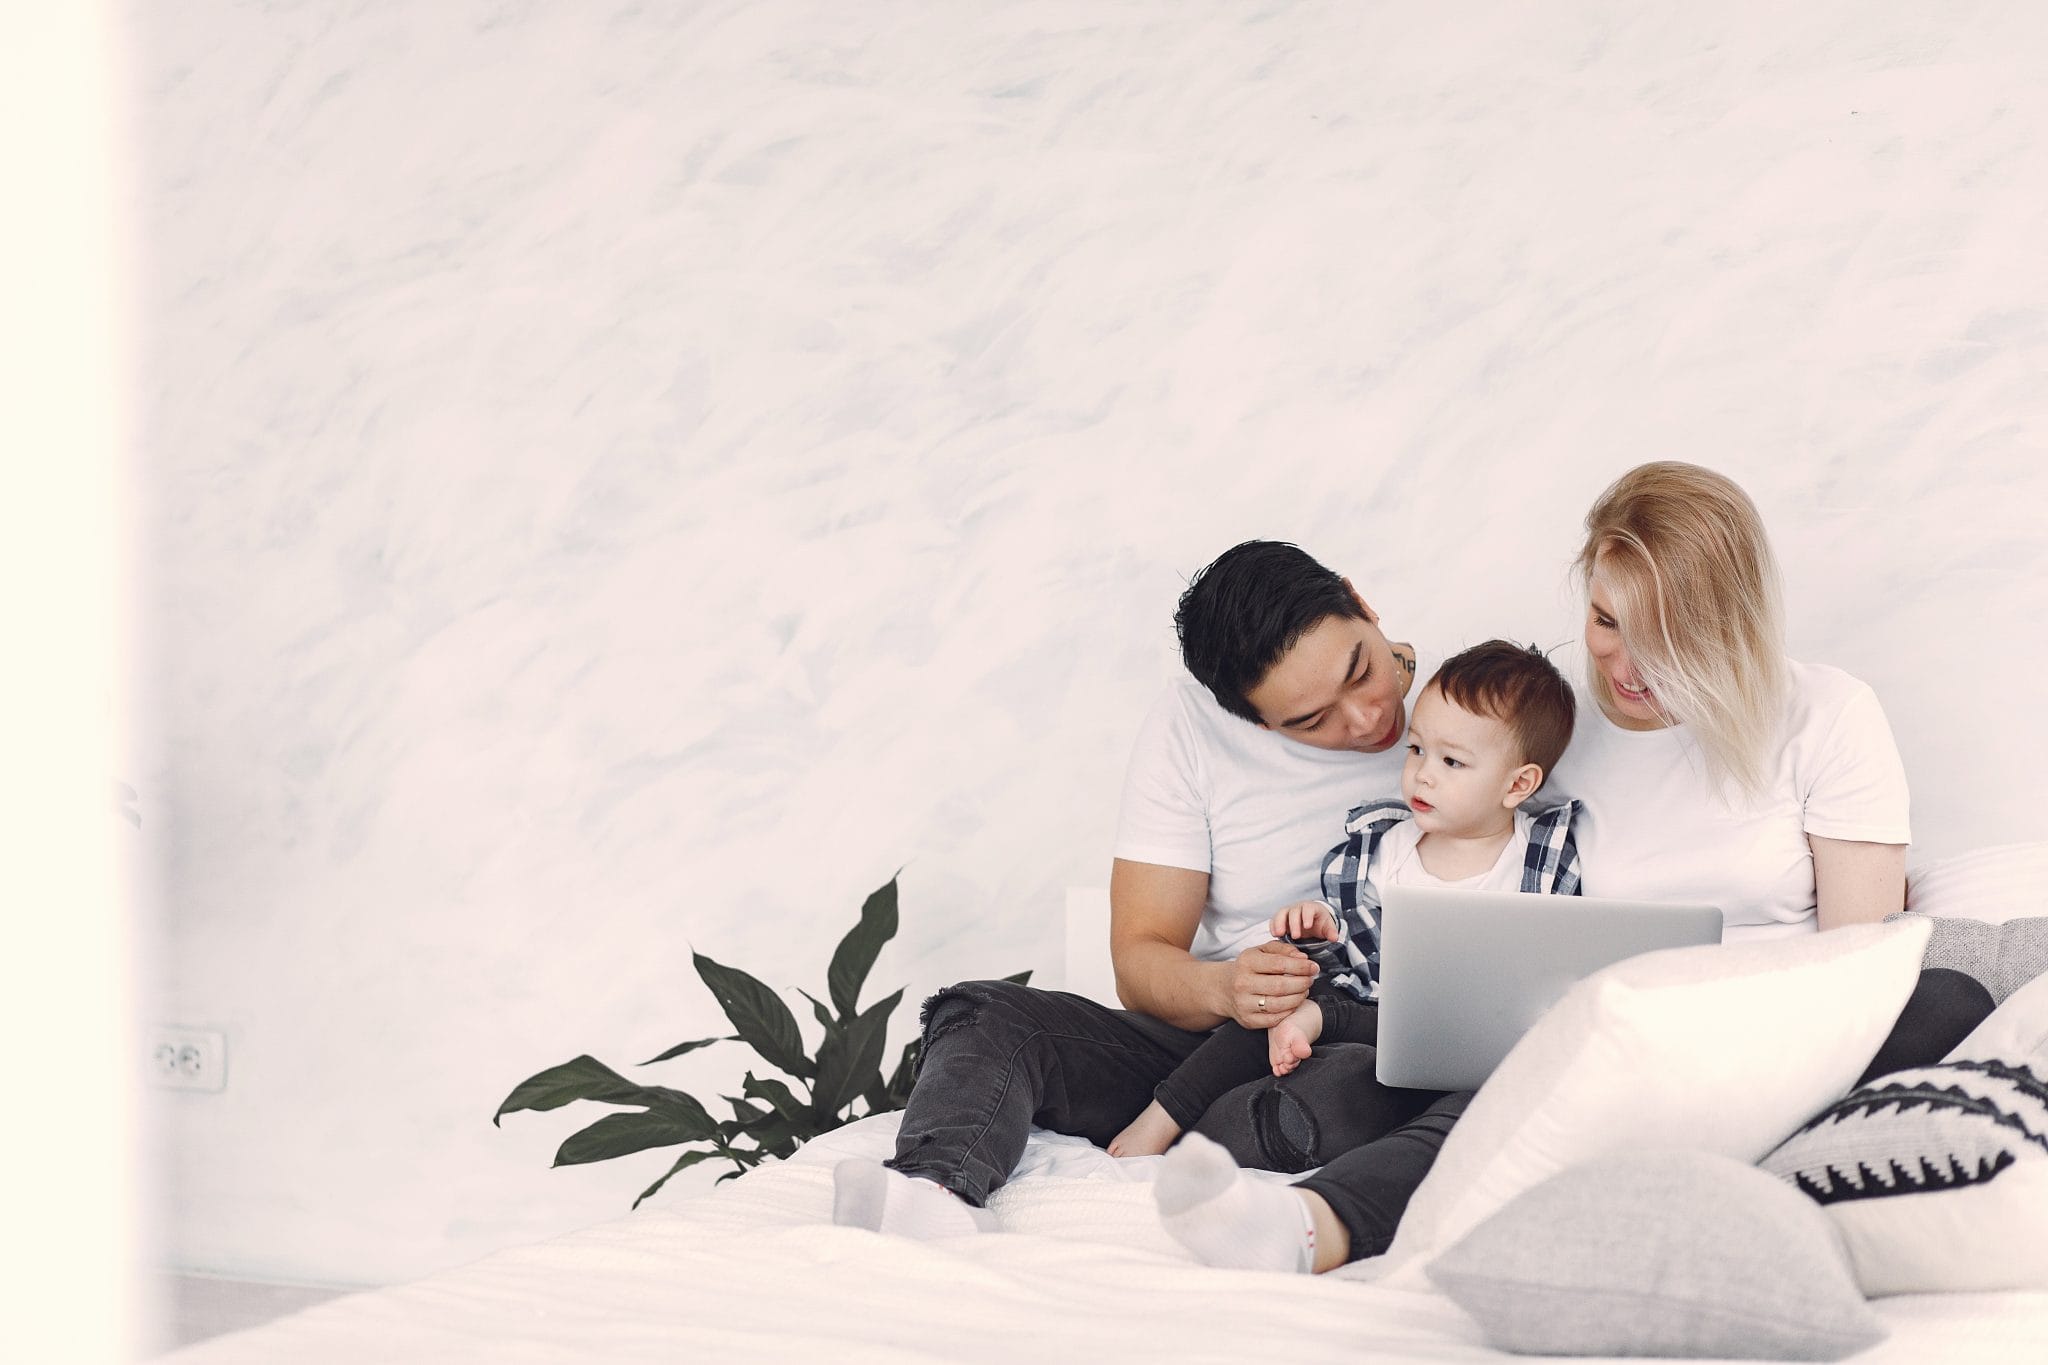 A family sits on a bed; a man and a woman lovingly look at a child who clutches a toy, with a laptop open in front of them.